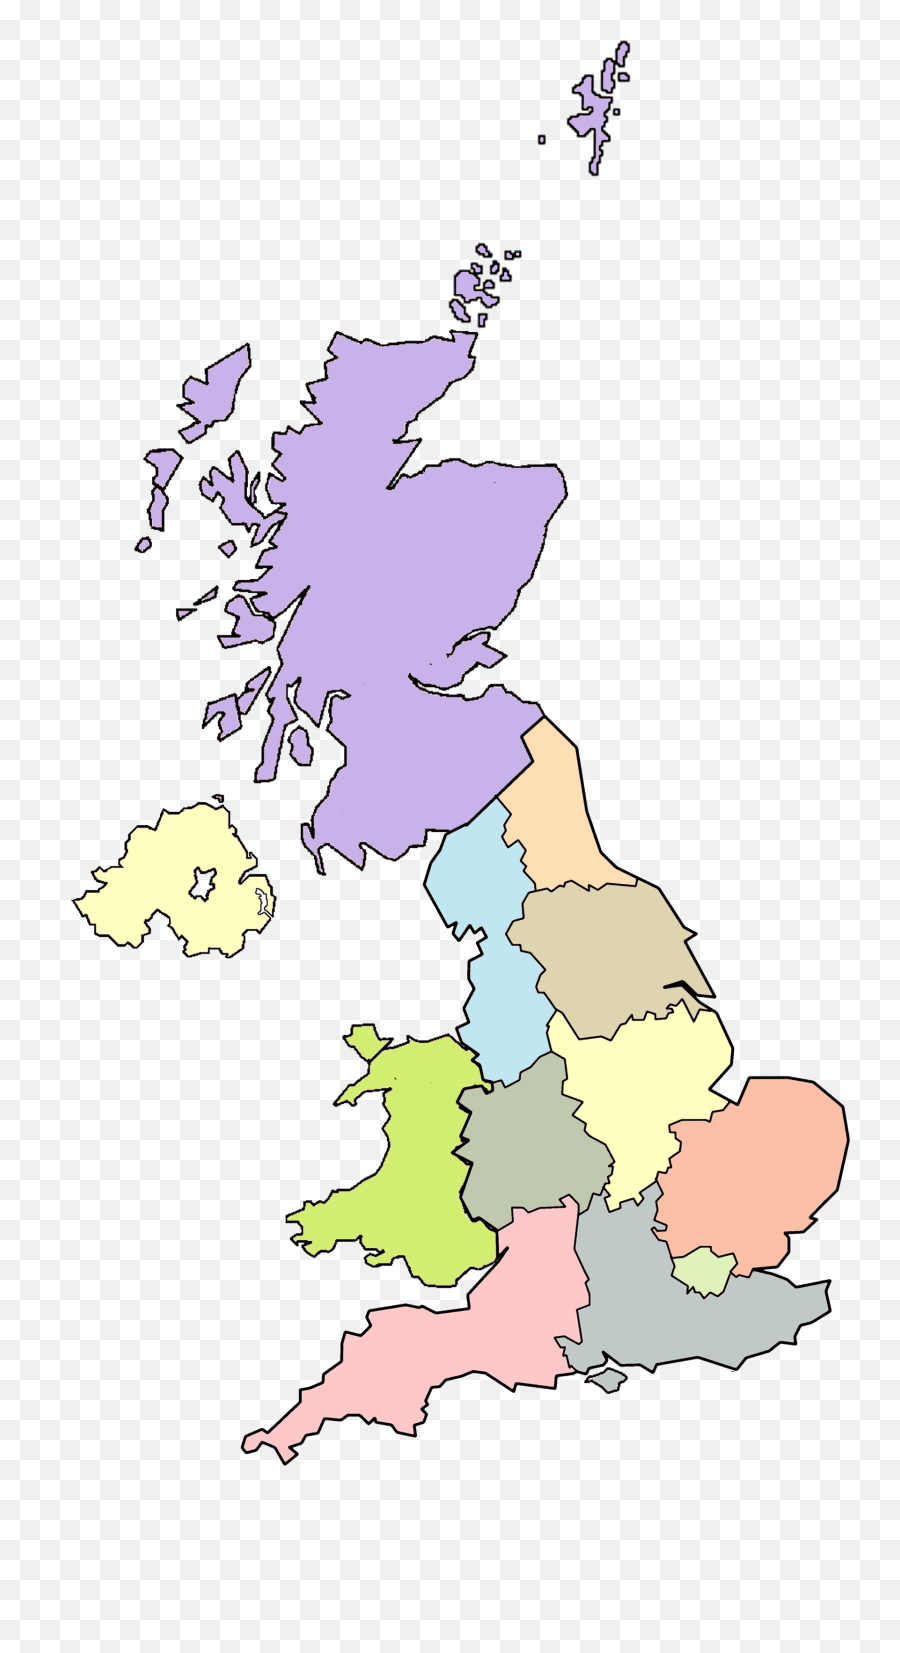 Fileunited Kingdom Nuts 1png - Wikimedia Commons Nuts 1 Map Uk,Nuts Png